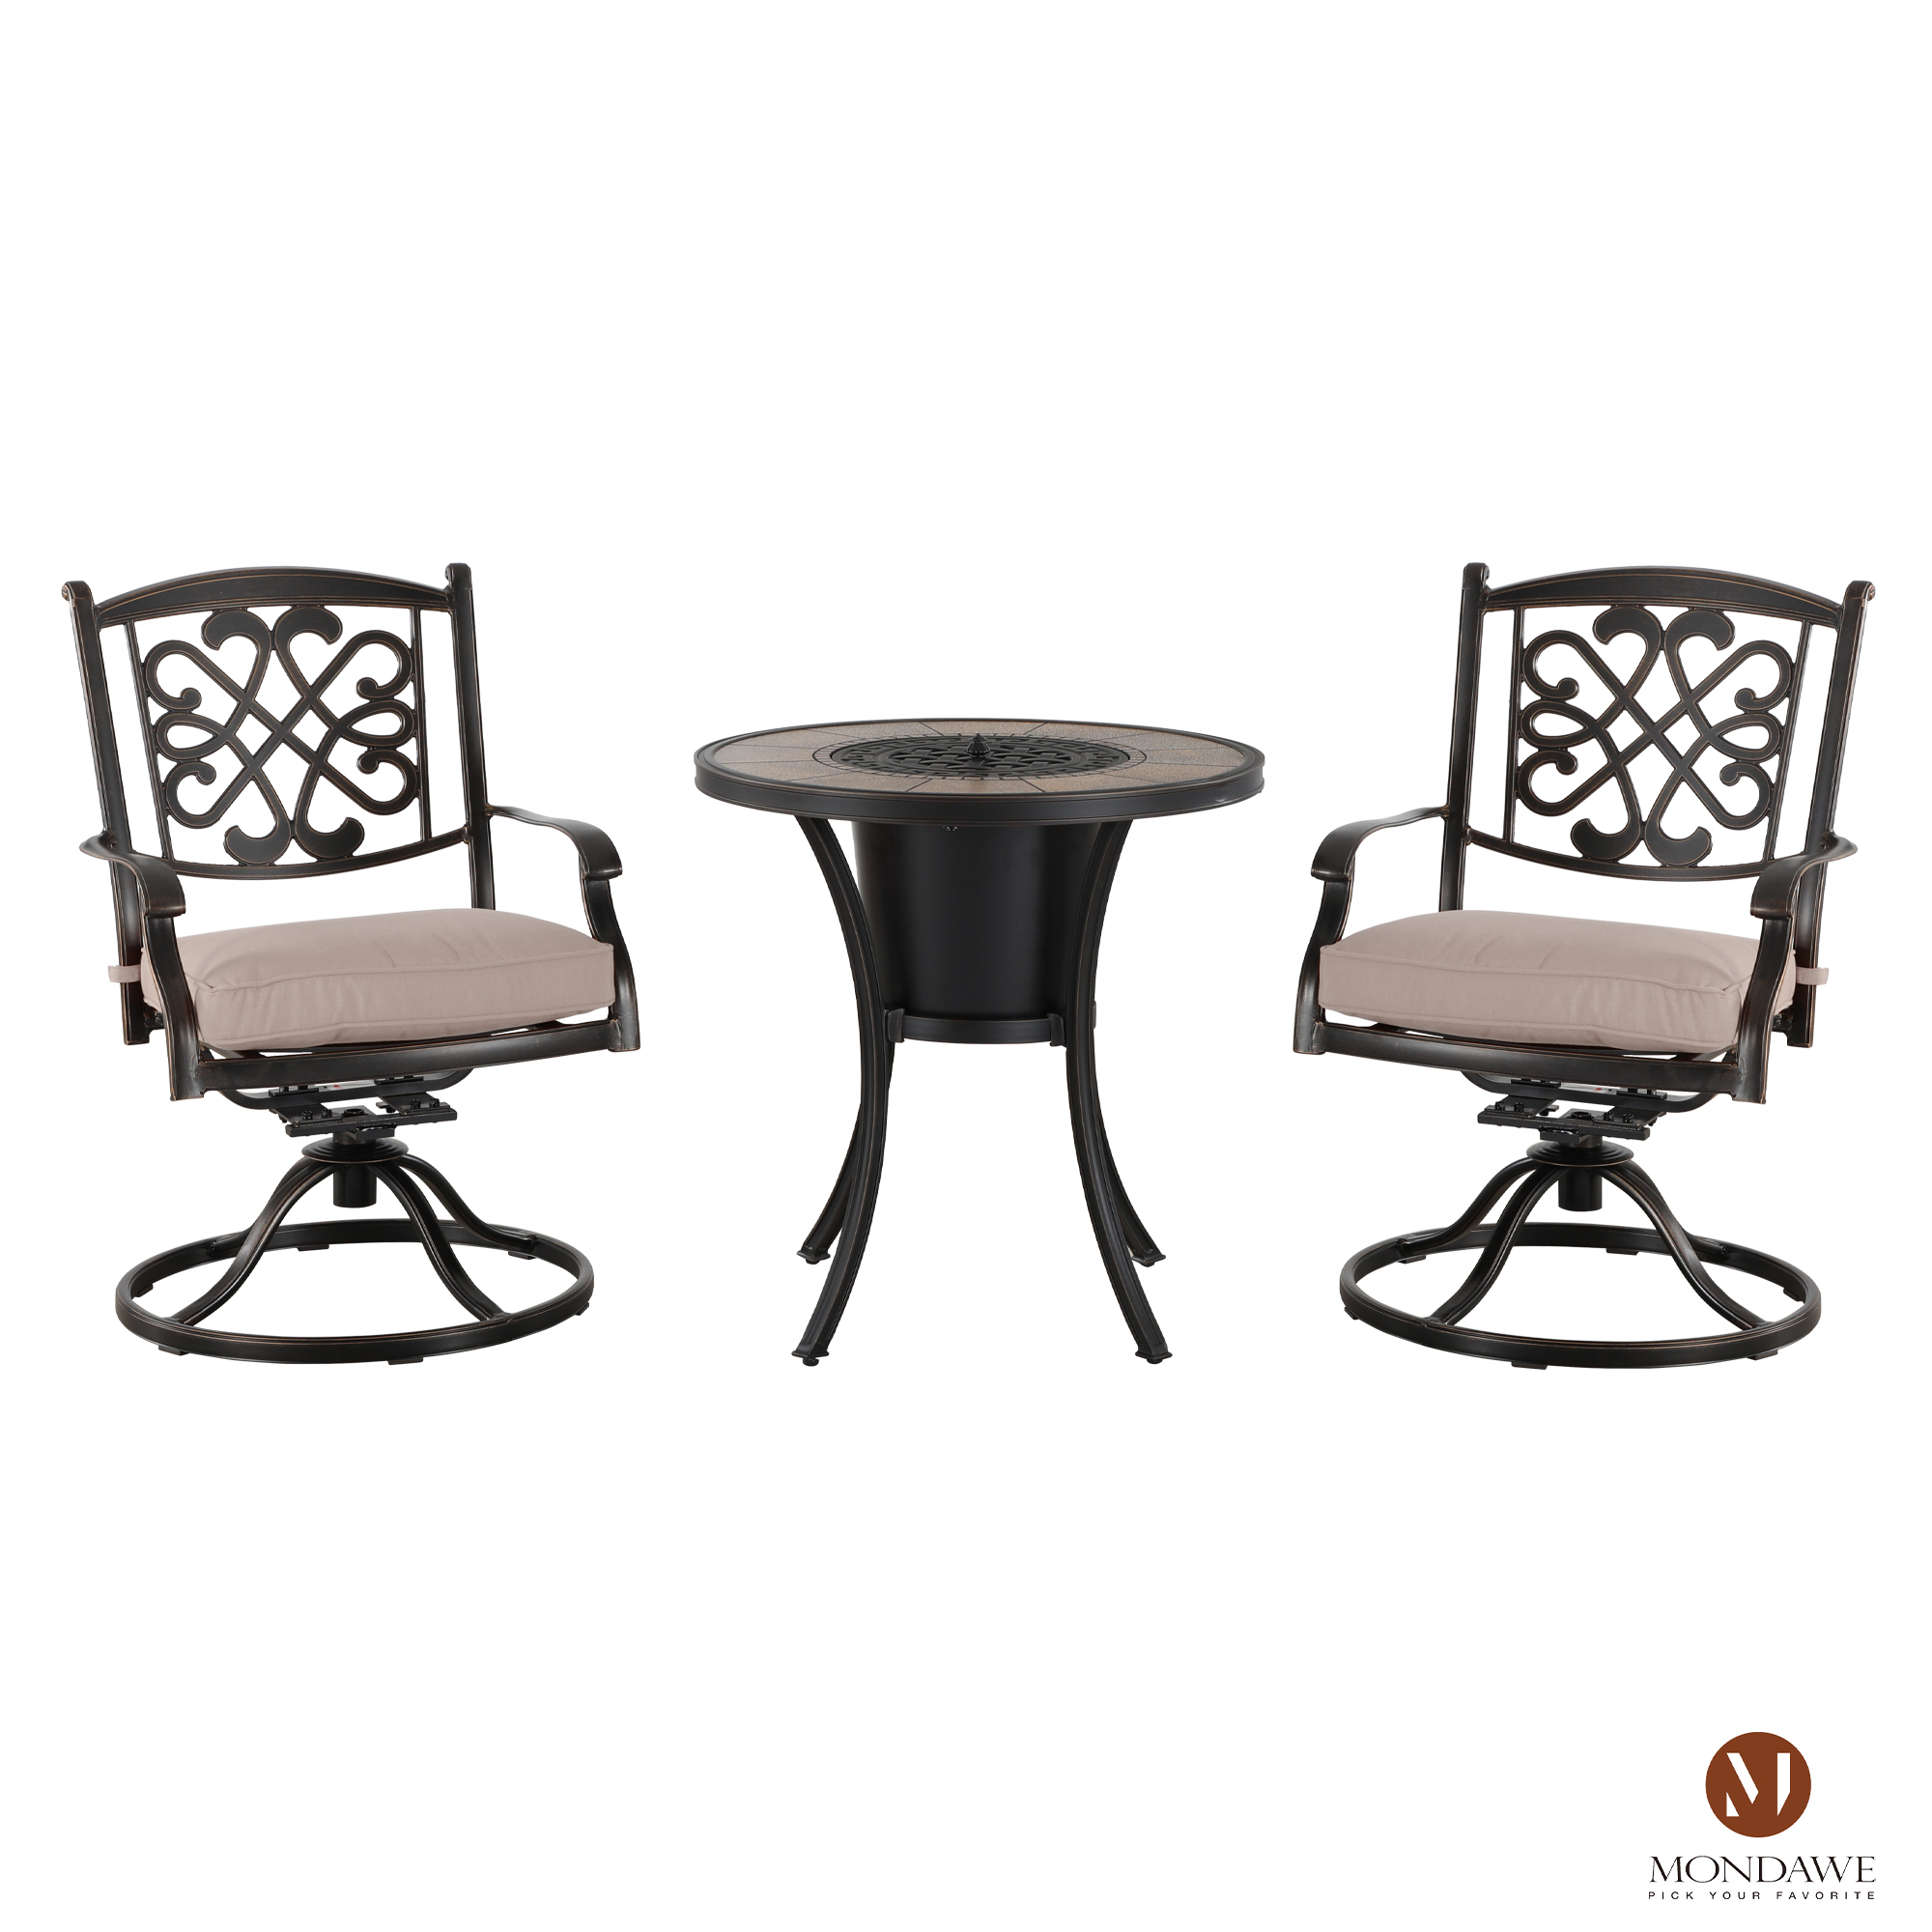 3-Piece Cast Aluminum Outdoor Bistro Set with Orange Cushions & Ceramic Tile Top Table with Ice Bucket-Mondawe